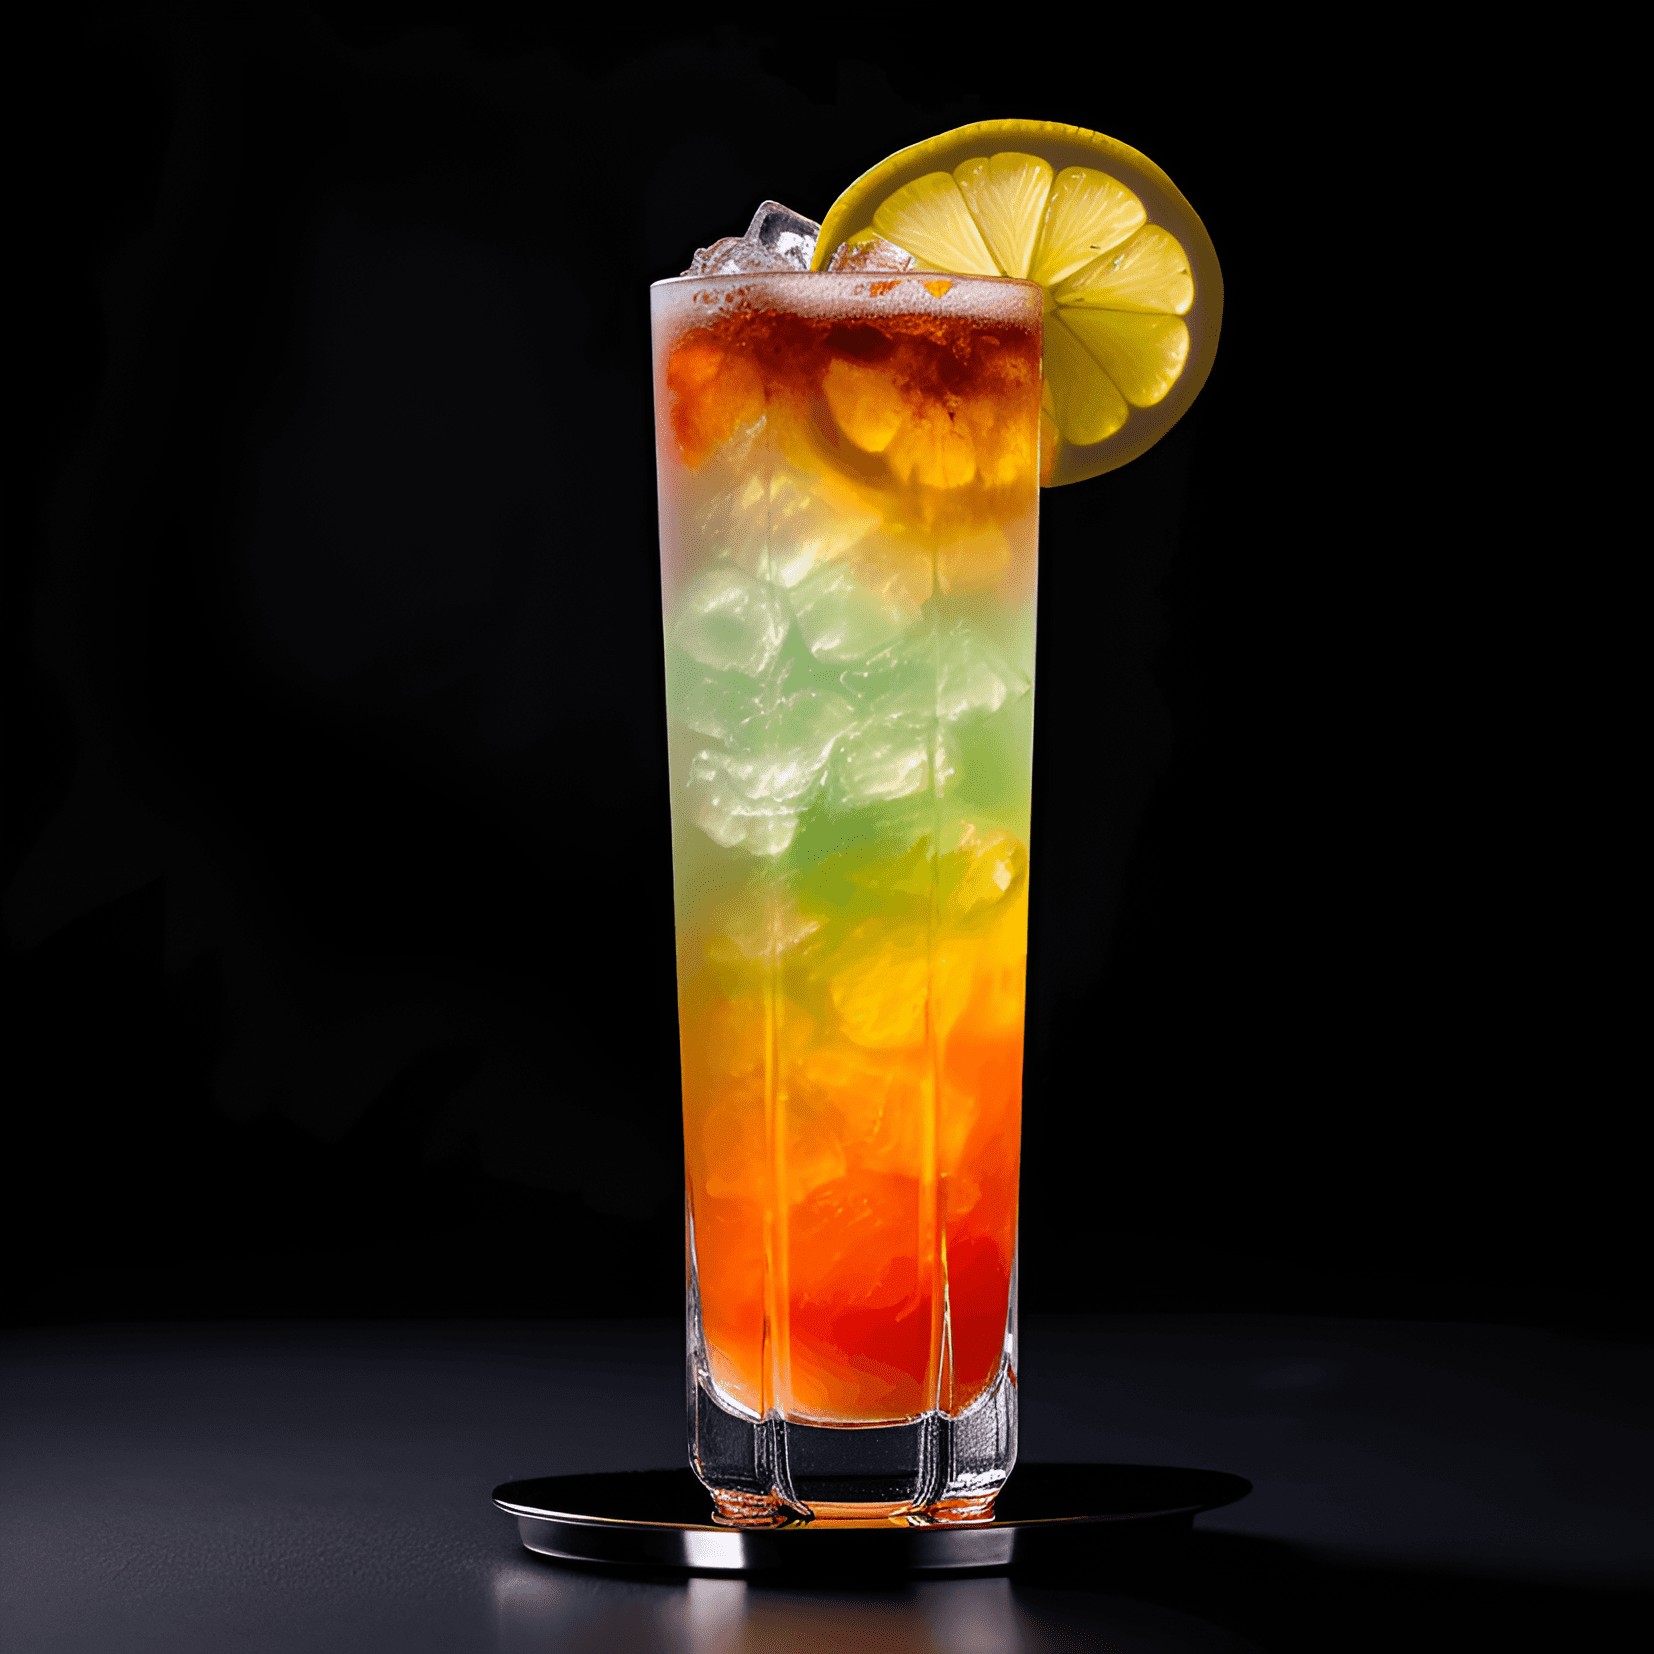 Quarantine Cocktail Recipe - The Quarantine cocktail is a delightful mix of sweet, sour, and slightly spicy flavors. The fruity notes from the orange and pineapple juices are balanced by the tangy lime and the subtle heat from the ginger syrup, while the rum adds a smooth, warming finish.